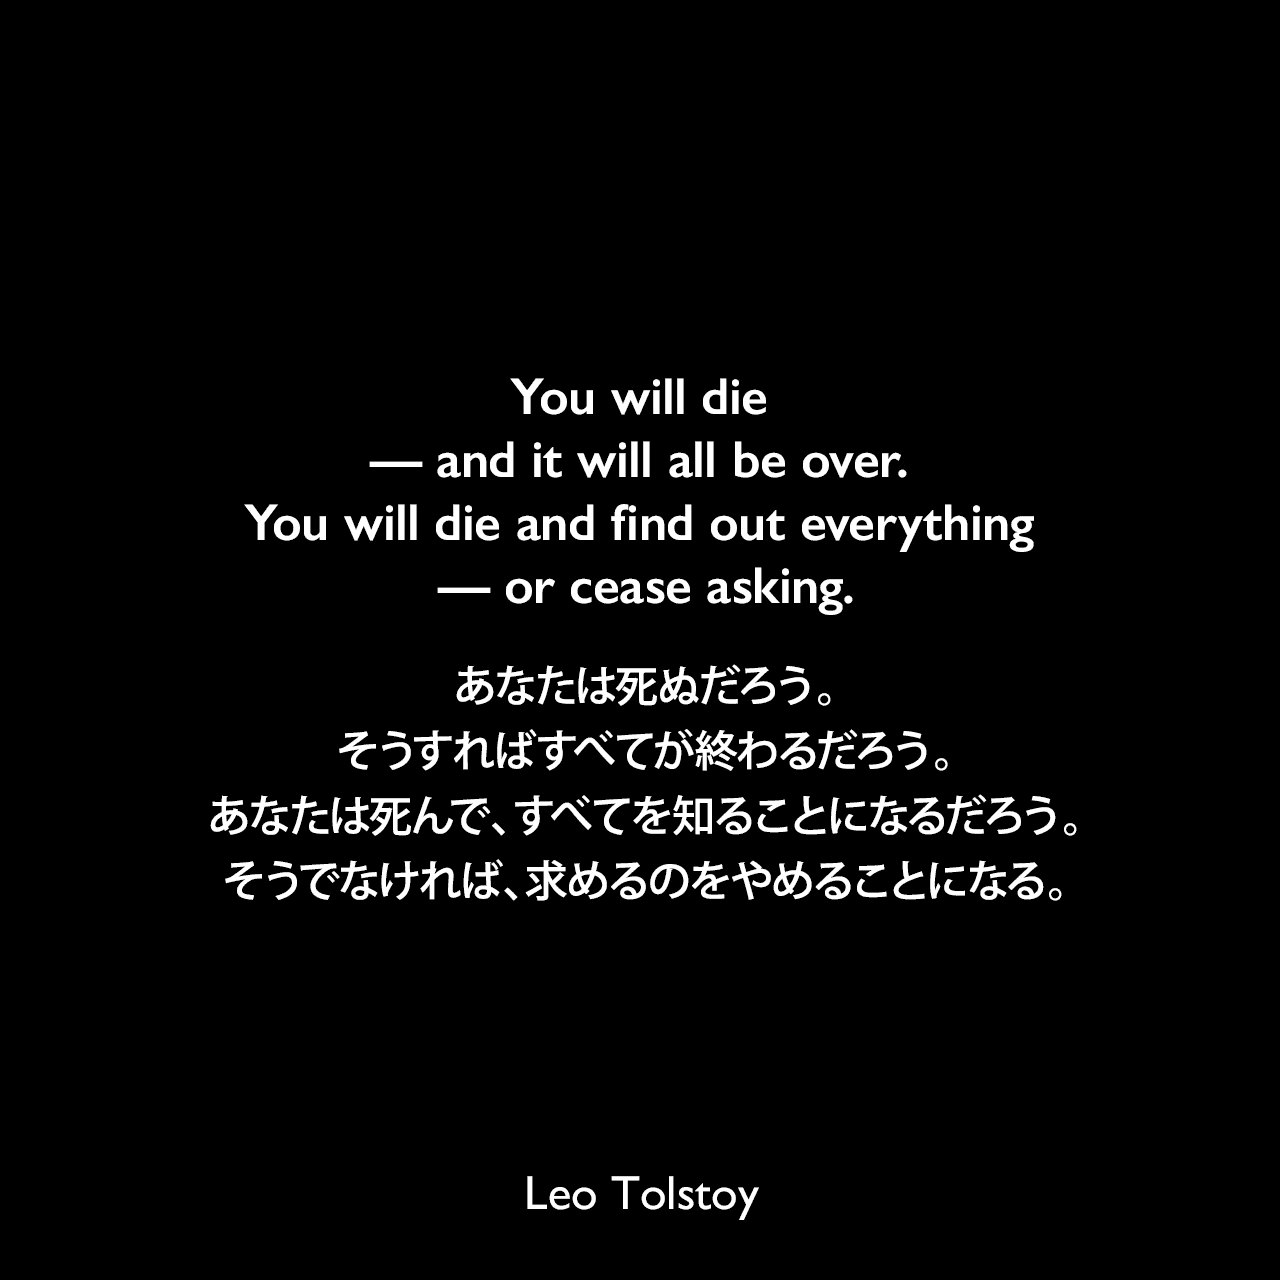 You will die — and it will all be over. You will die and find out everything — or cease asking.あなたは死ぬだろう。そうすればすべてが終わるだろう。あなたは死んで、すべてを知ることになるだろう。そうでなければ、求めるのをやめることになる。- トルストイによる小説「戦争と平和」よりLeo Tolstoy